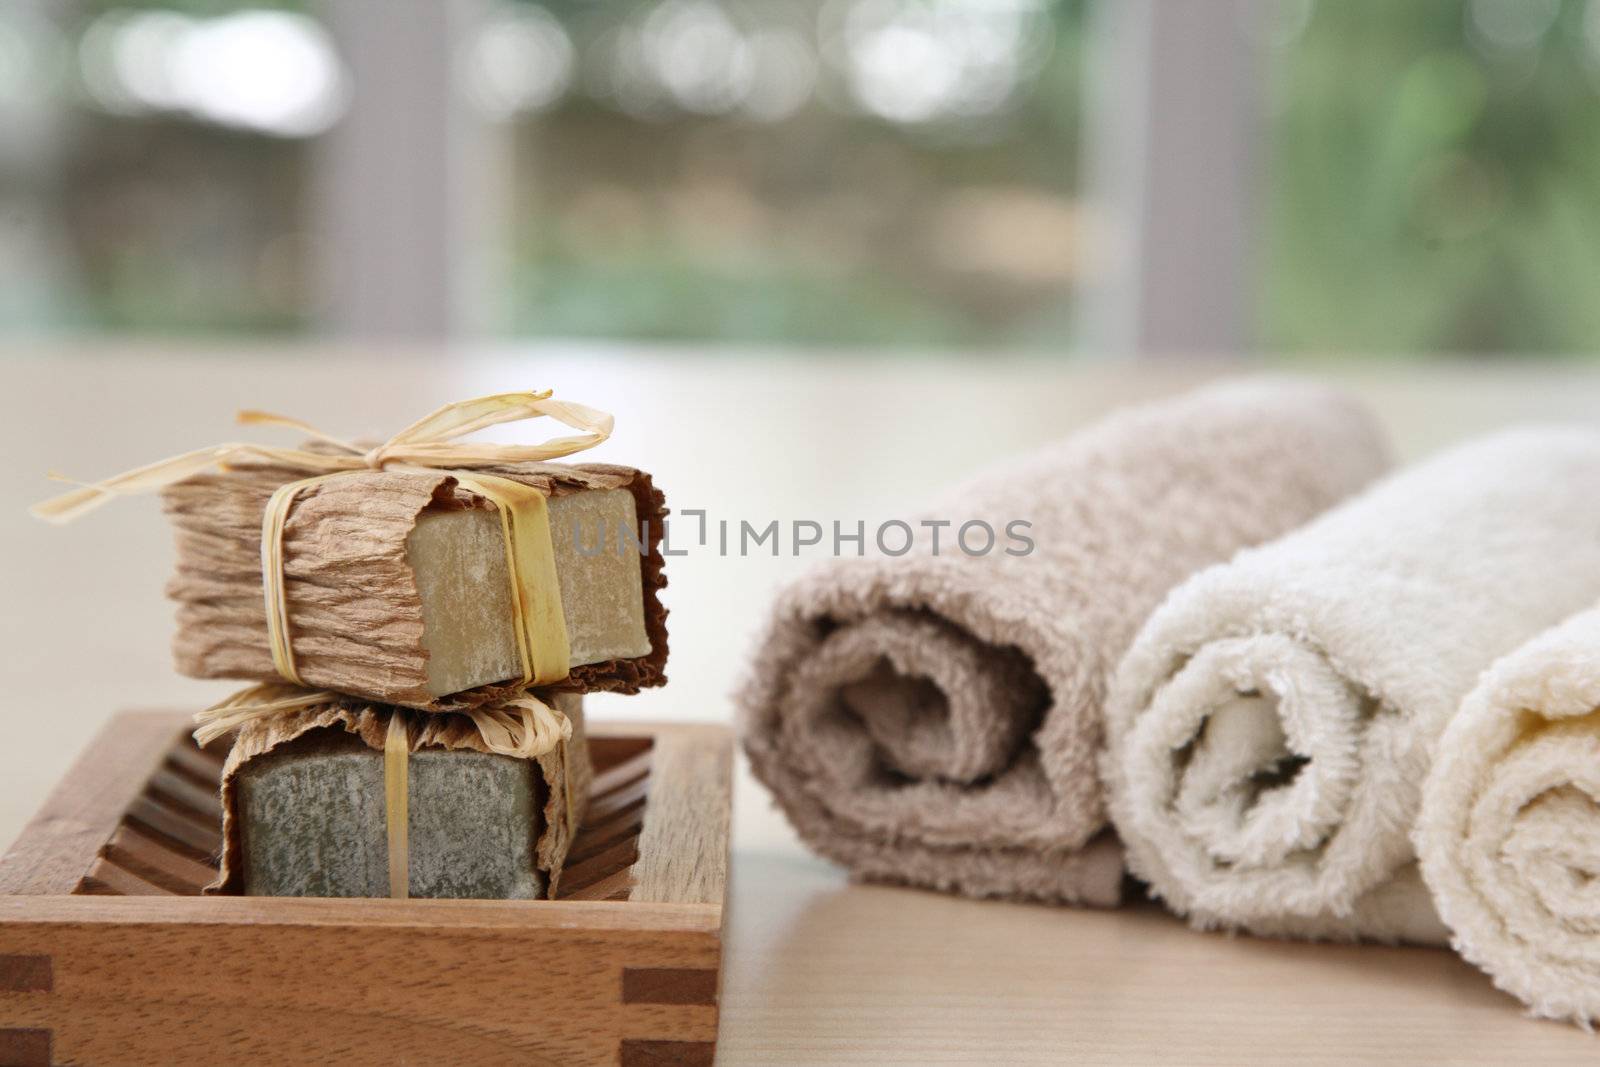 Soaps,towels amd wook basket with a blurred background